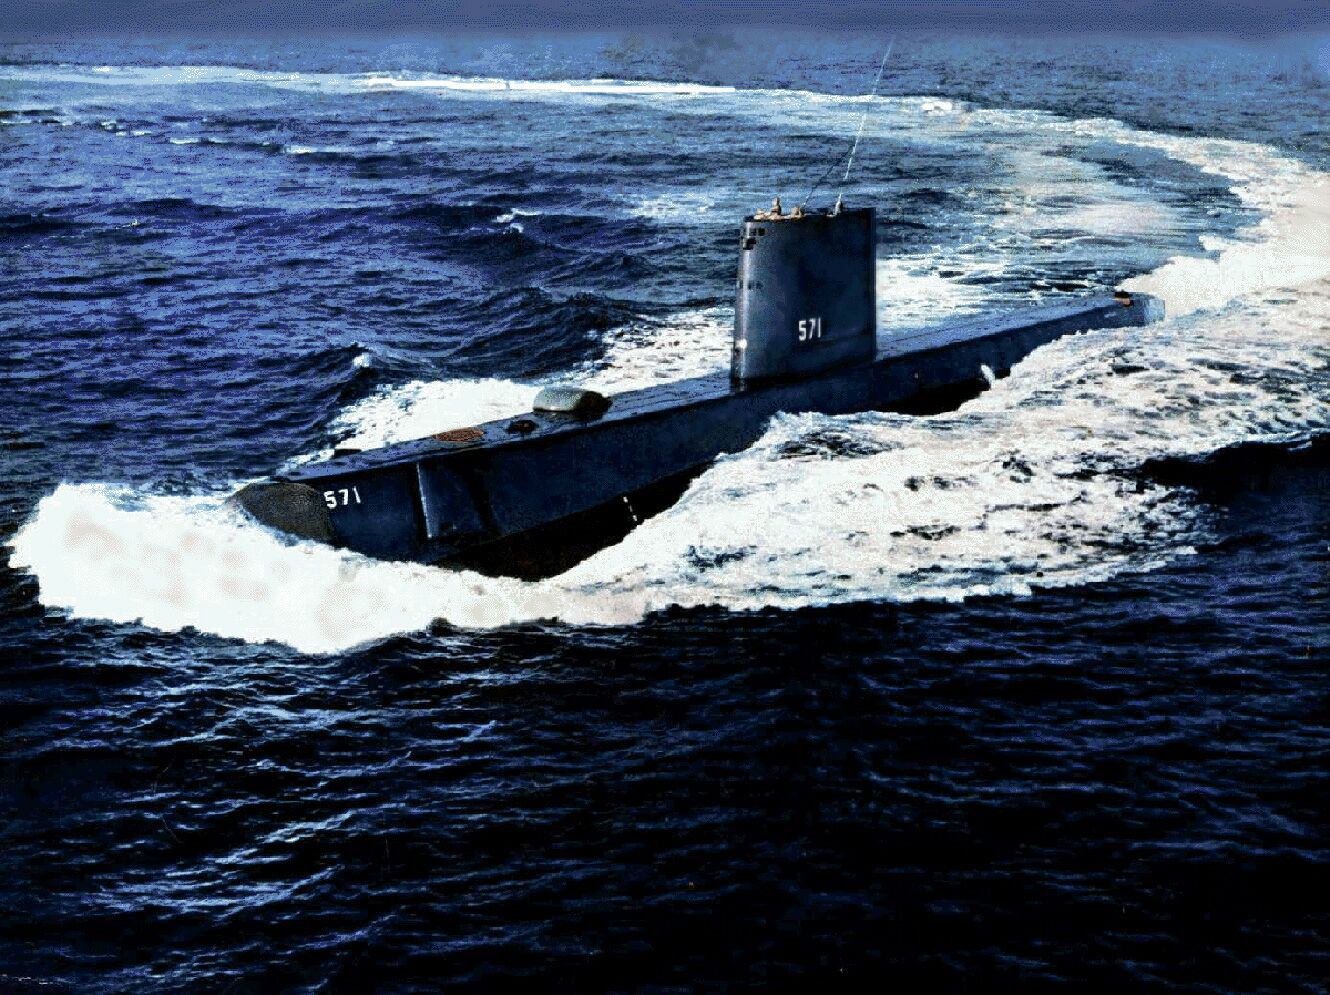 The U.S. Navy submarine USS Nautilus is commissioned as the world's first nuclear reactor powered vessel